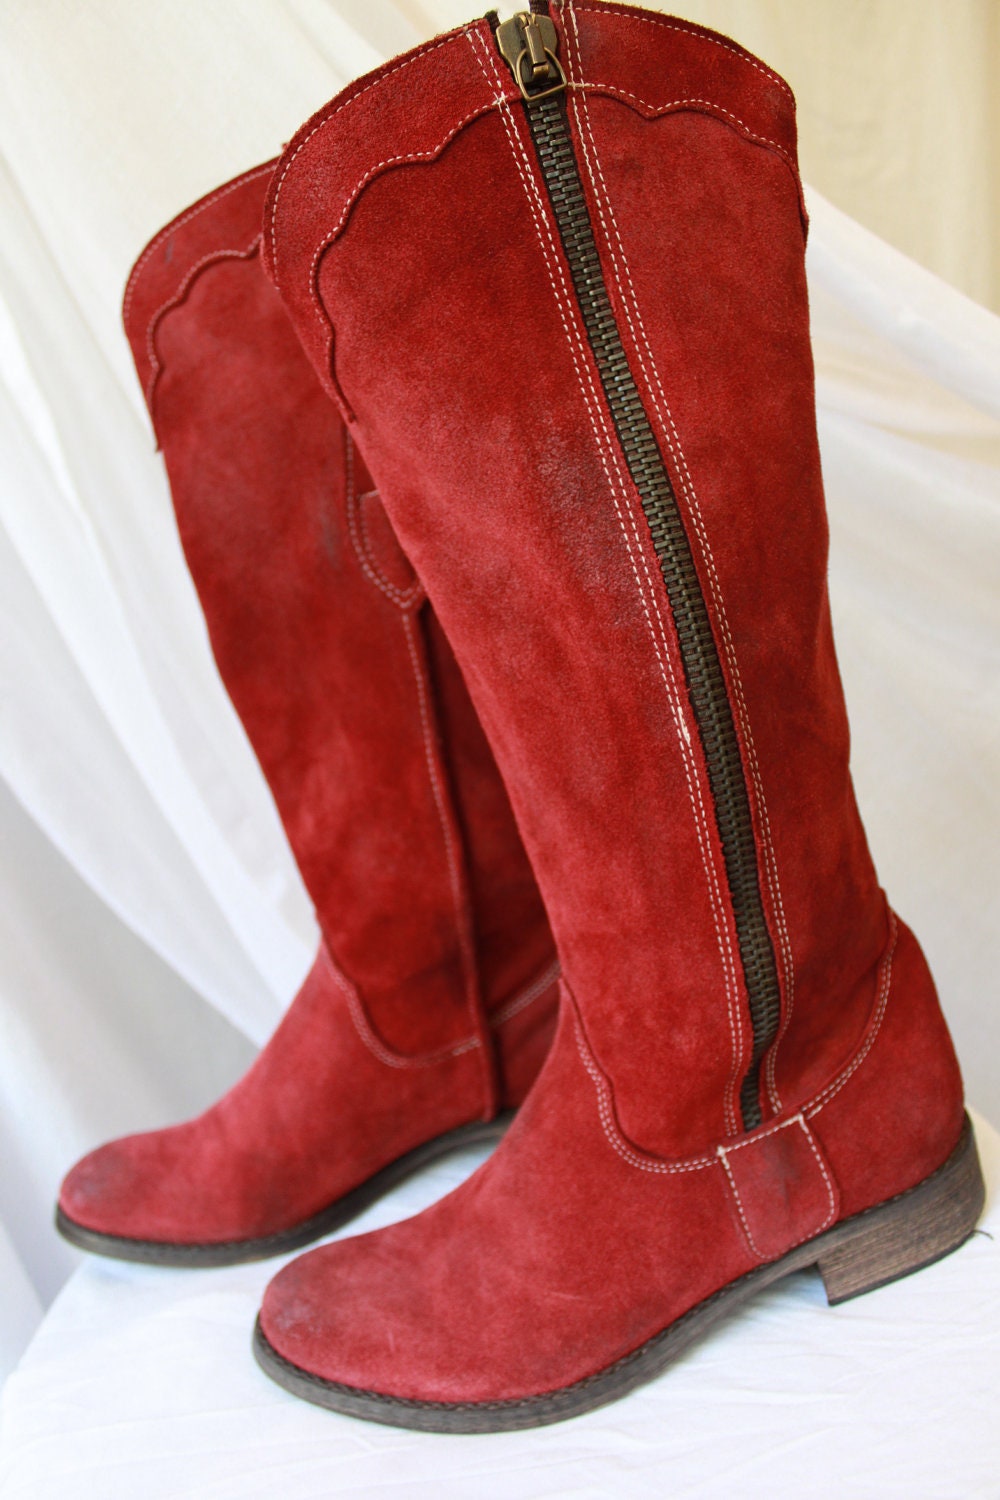 Vintage Womens Red Leather Boots by Vera Gomma by myswagshack